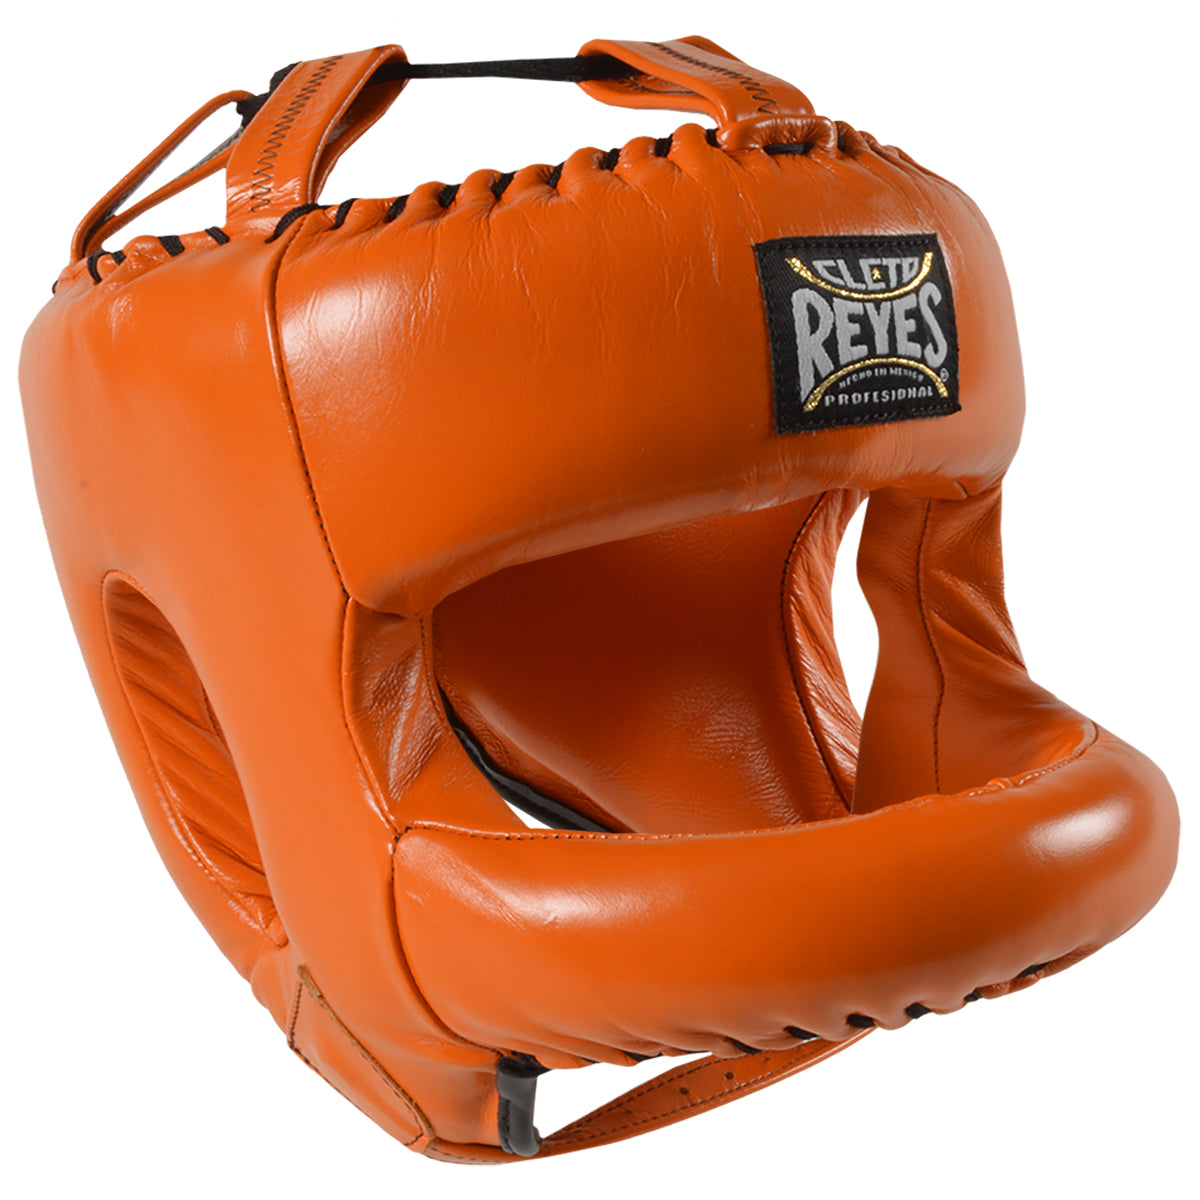 Cleto Reyes Redesigned Leather Boxing Headgear with Nylon Face Bar Cleto Reyes